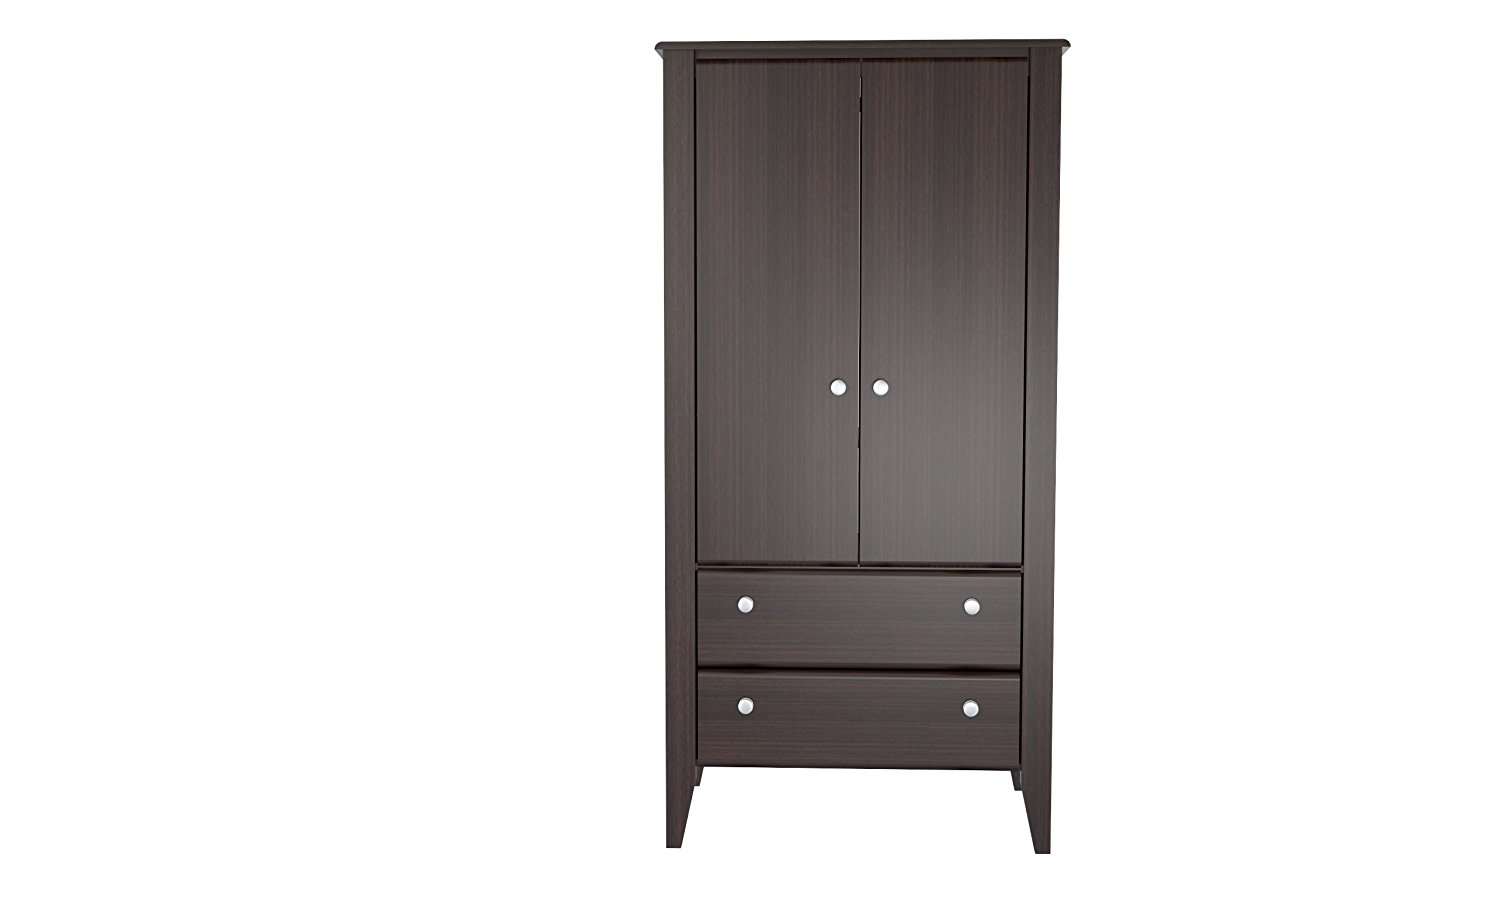 63" Espresso Melamine and Engineered Wood Wardrobe with 2 Doors and 2 Drawers